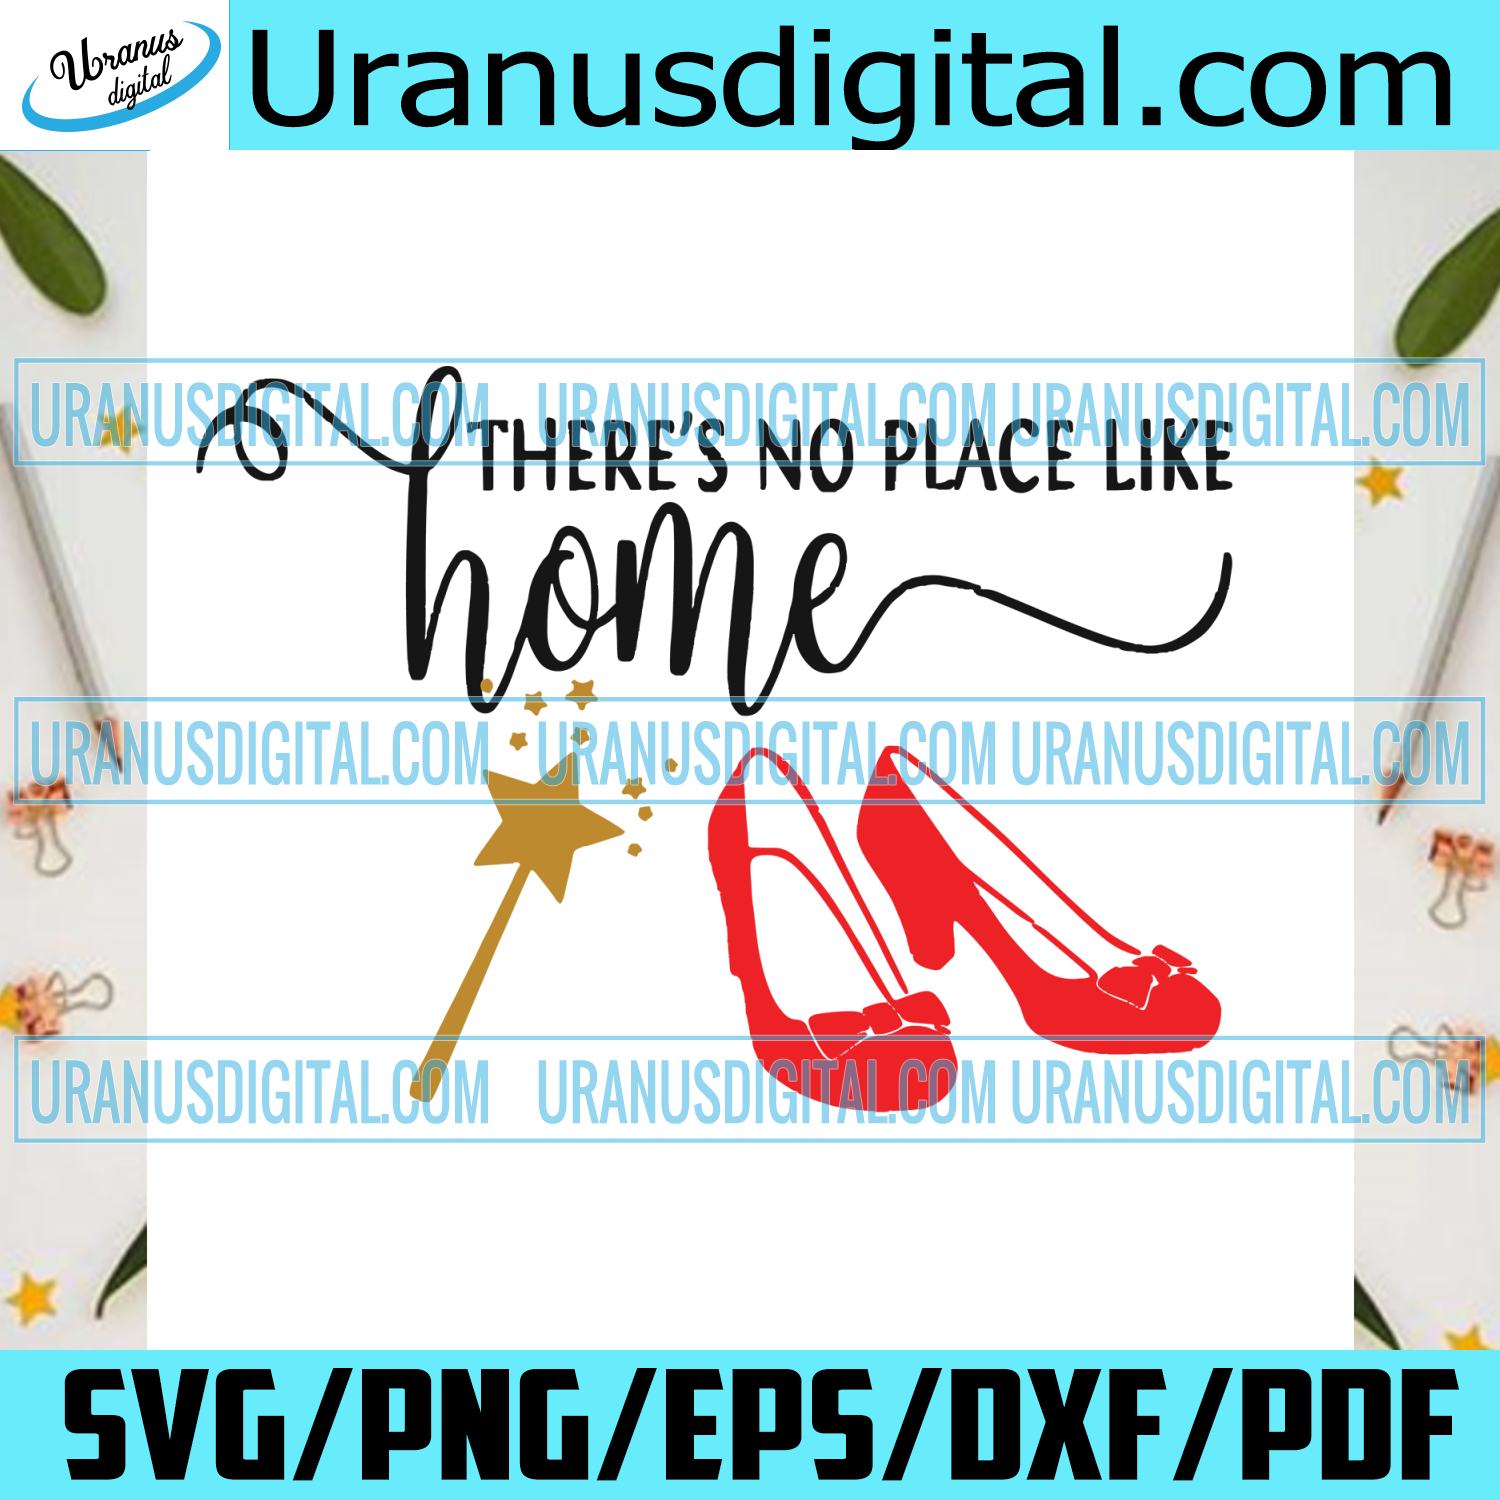 Download Theres No Place Like Home Trending Svg Quotes Svg Home Svg Red Sho Uranusdigital